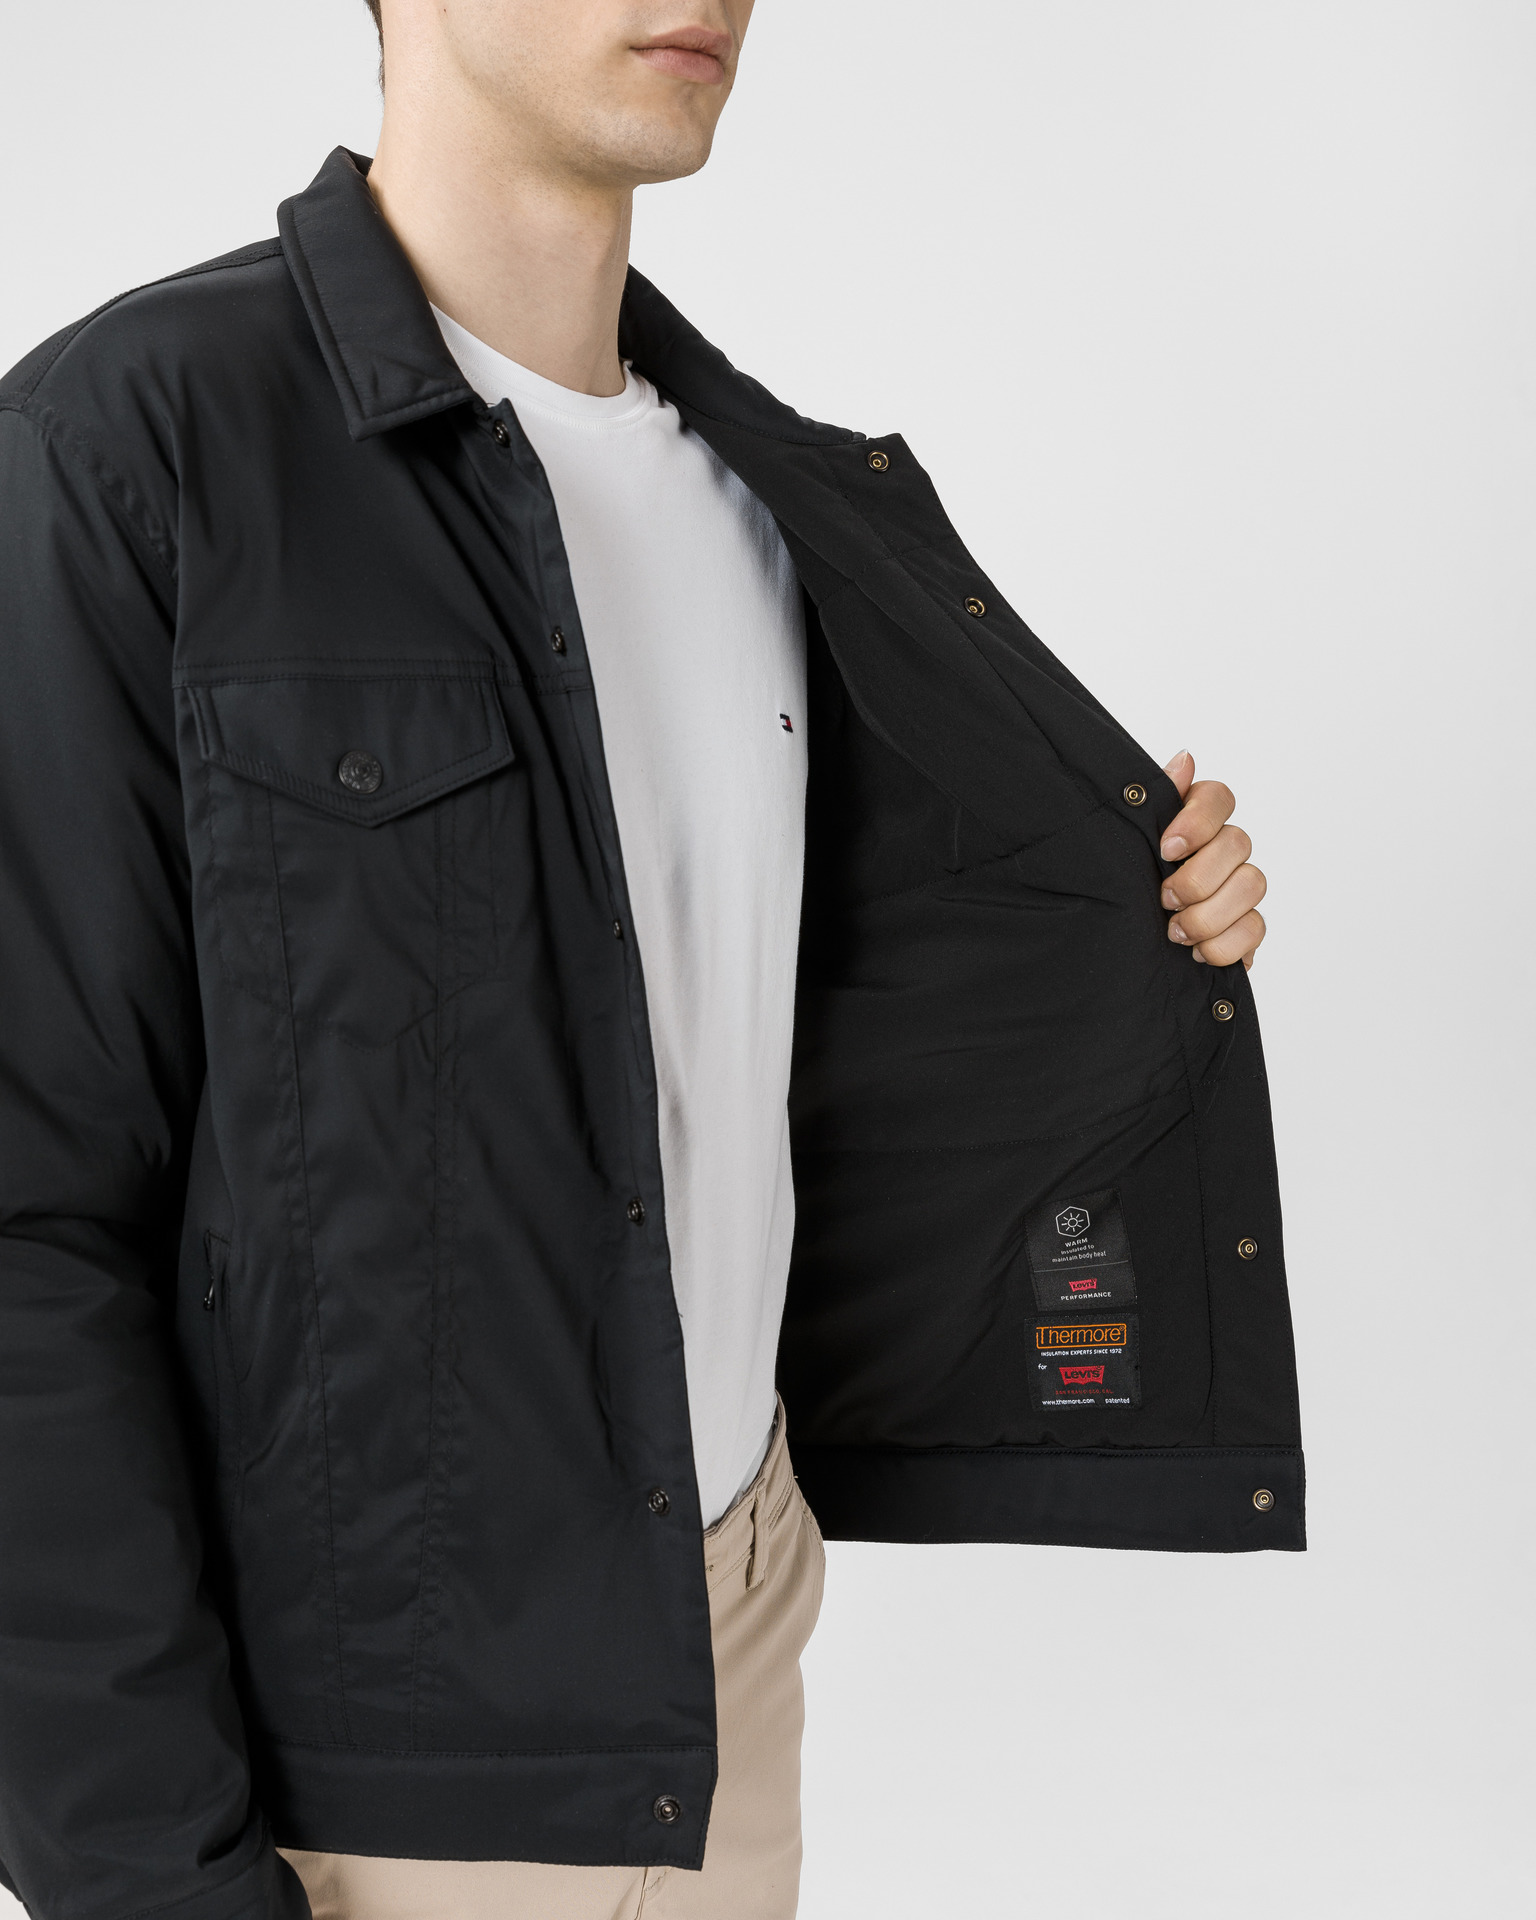 levi's thermore trucker jacket